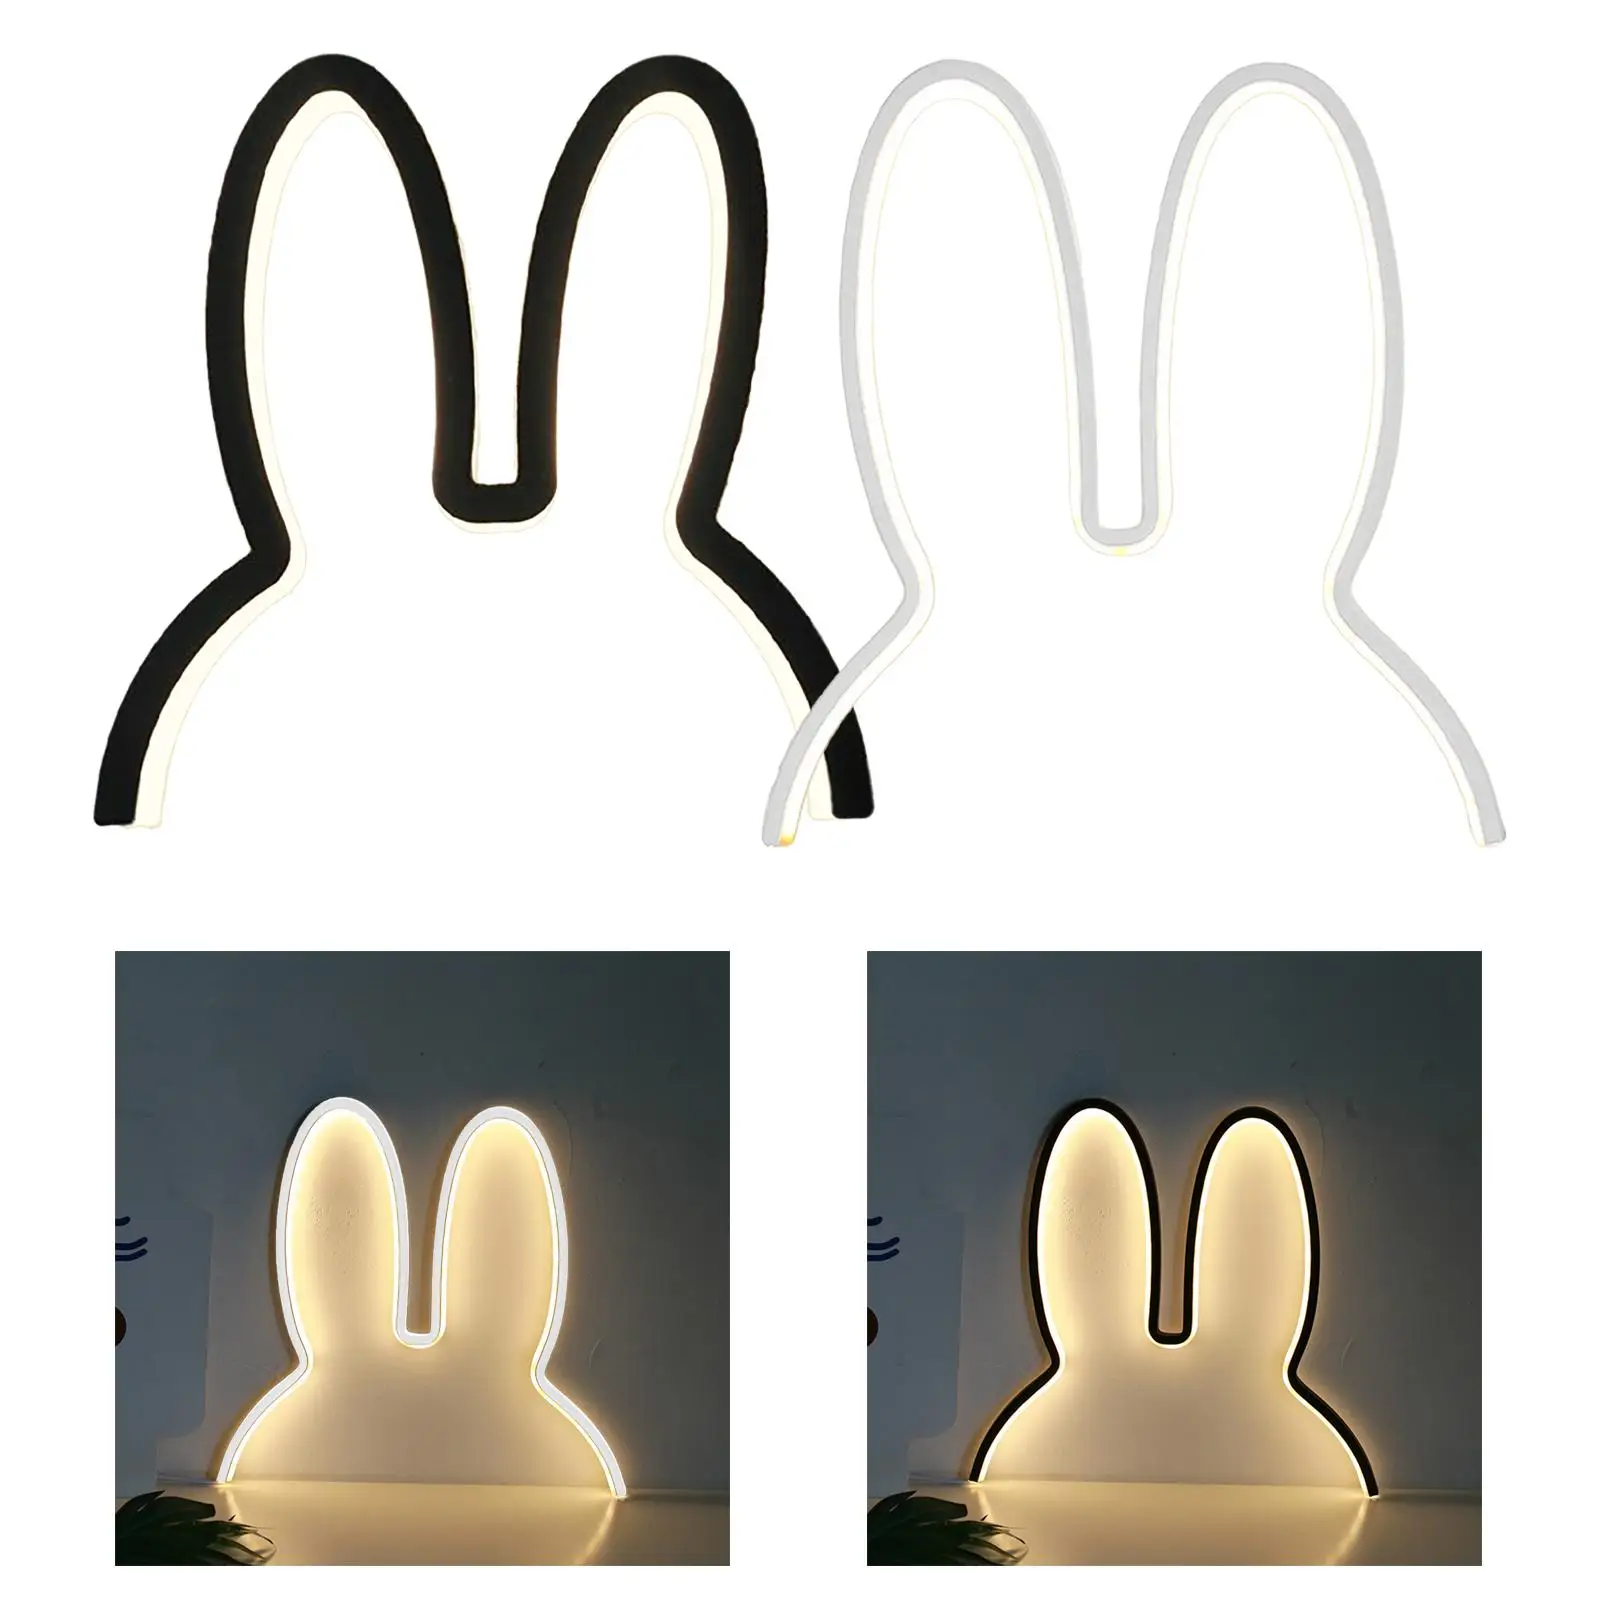 Creative LED Lamp USB Powered Warm Light Light Bar Dimmable Rabbit Night Light for Kids Room Office Ornament Xmas Gift Holiday